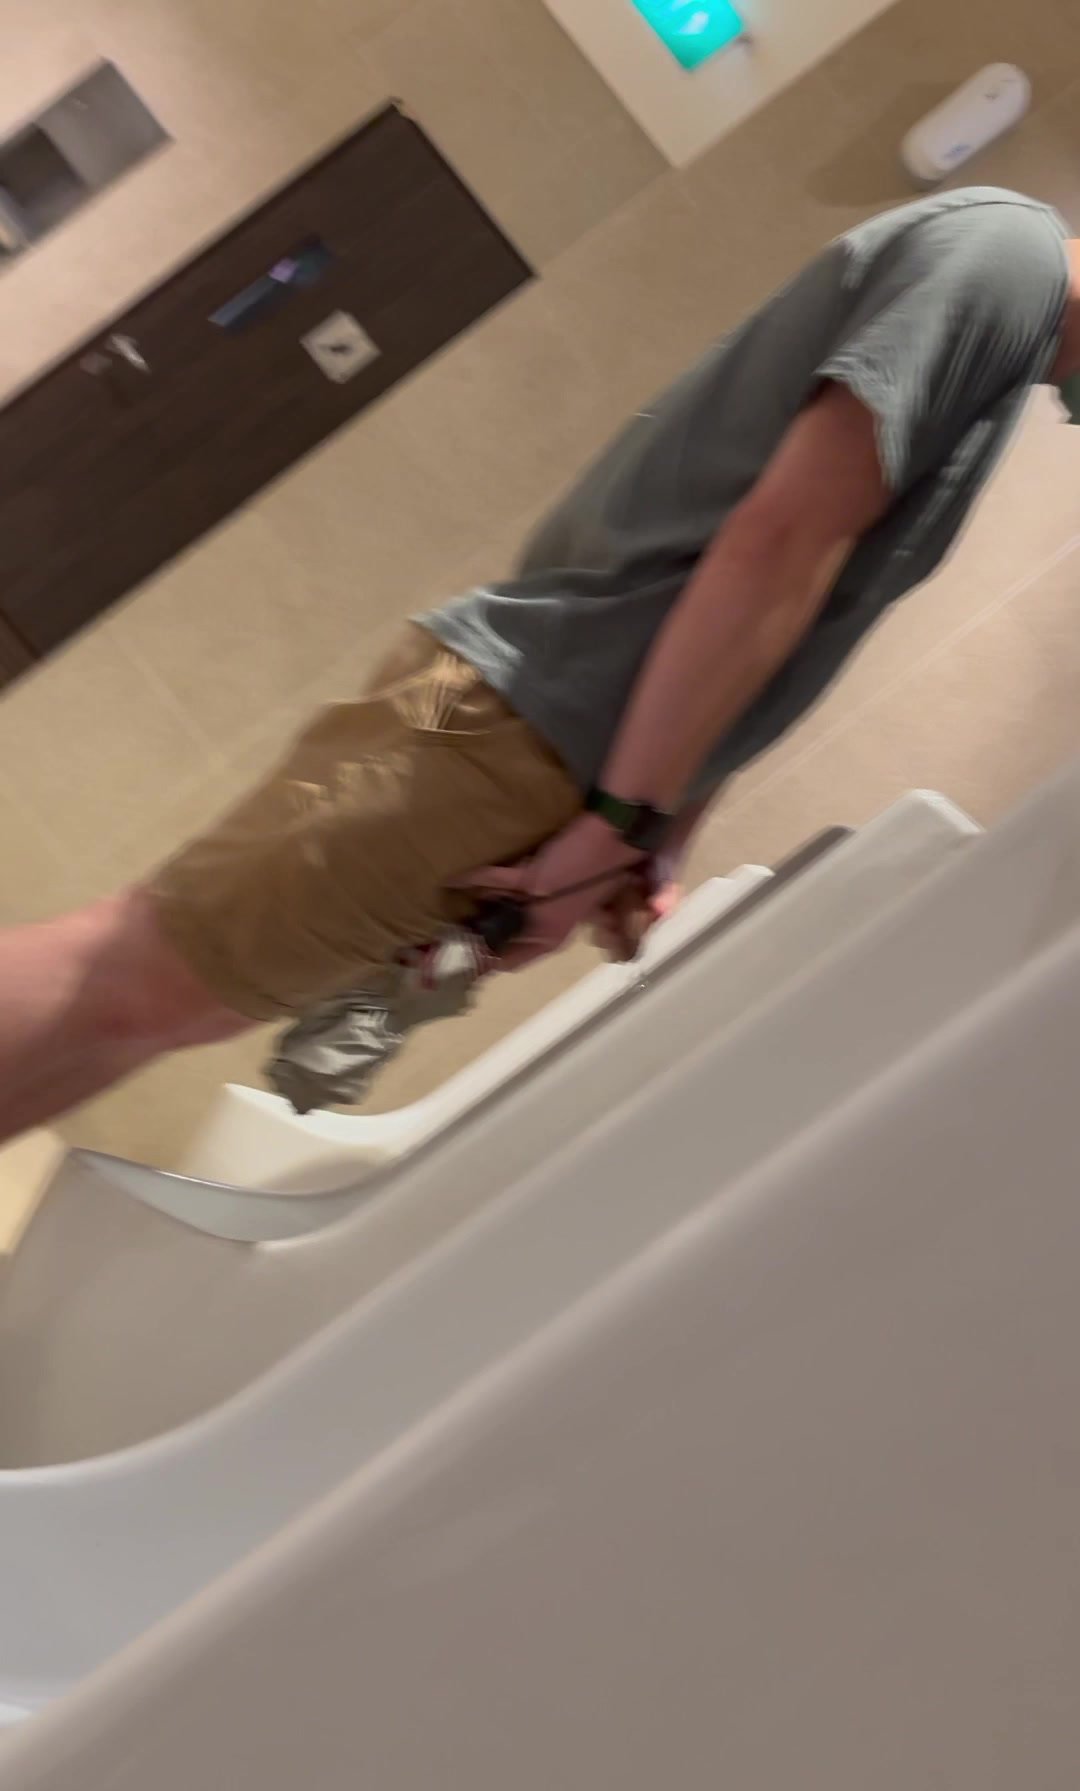 Caught Young Boy Pissing at Urinal